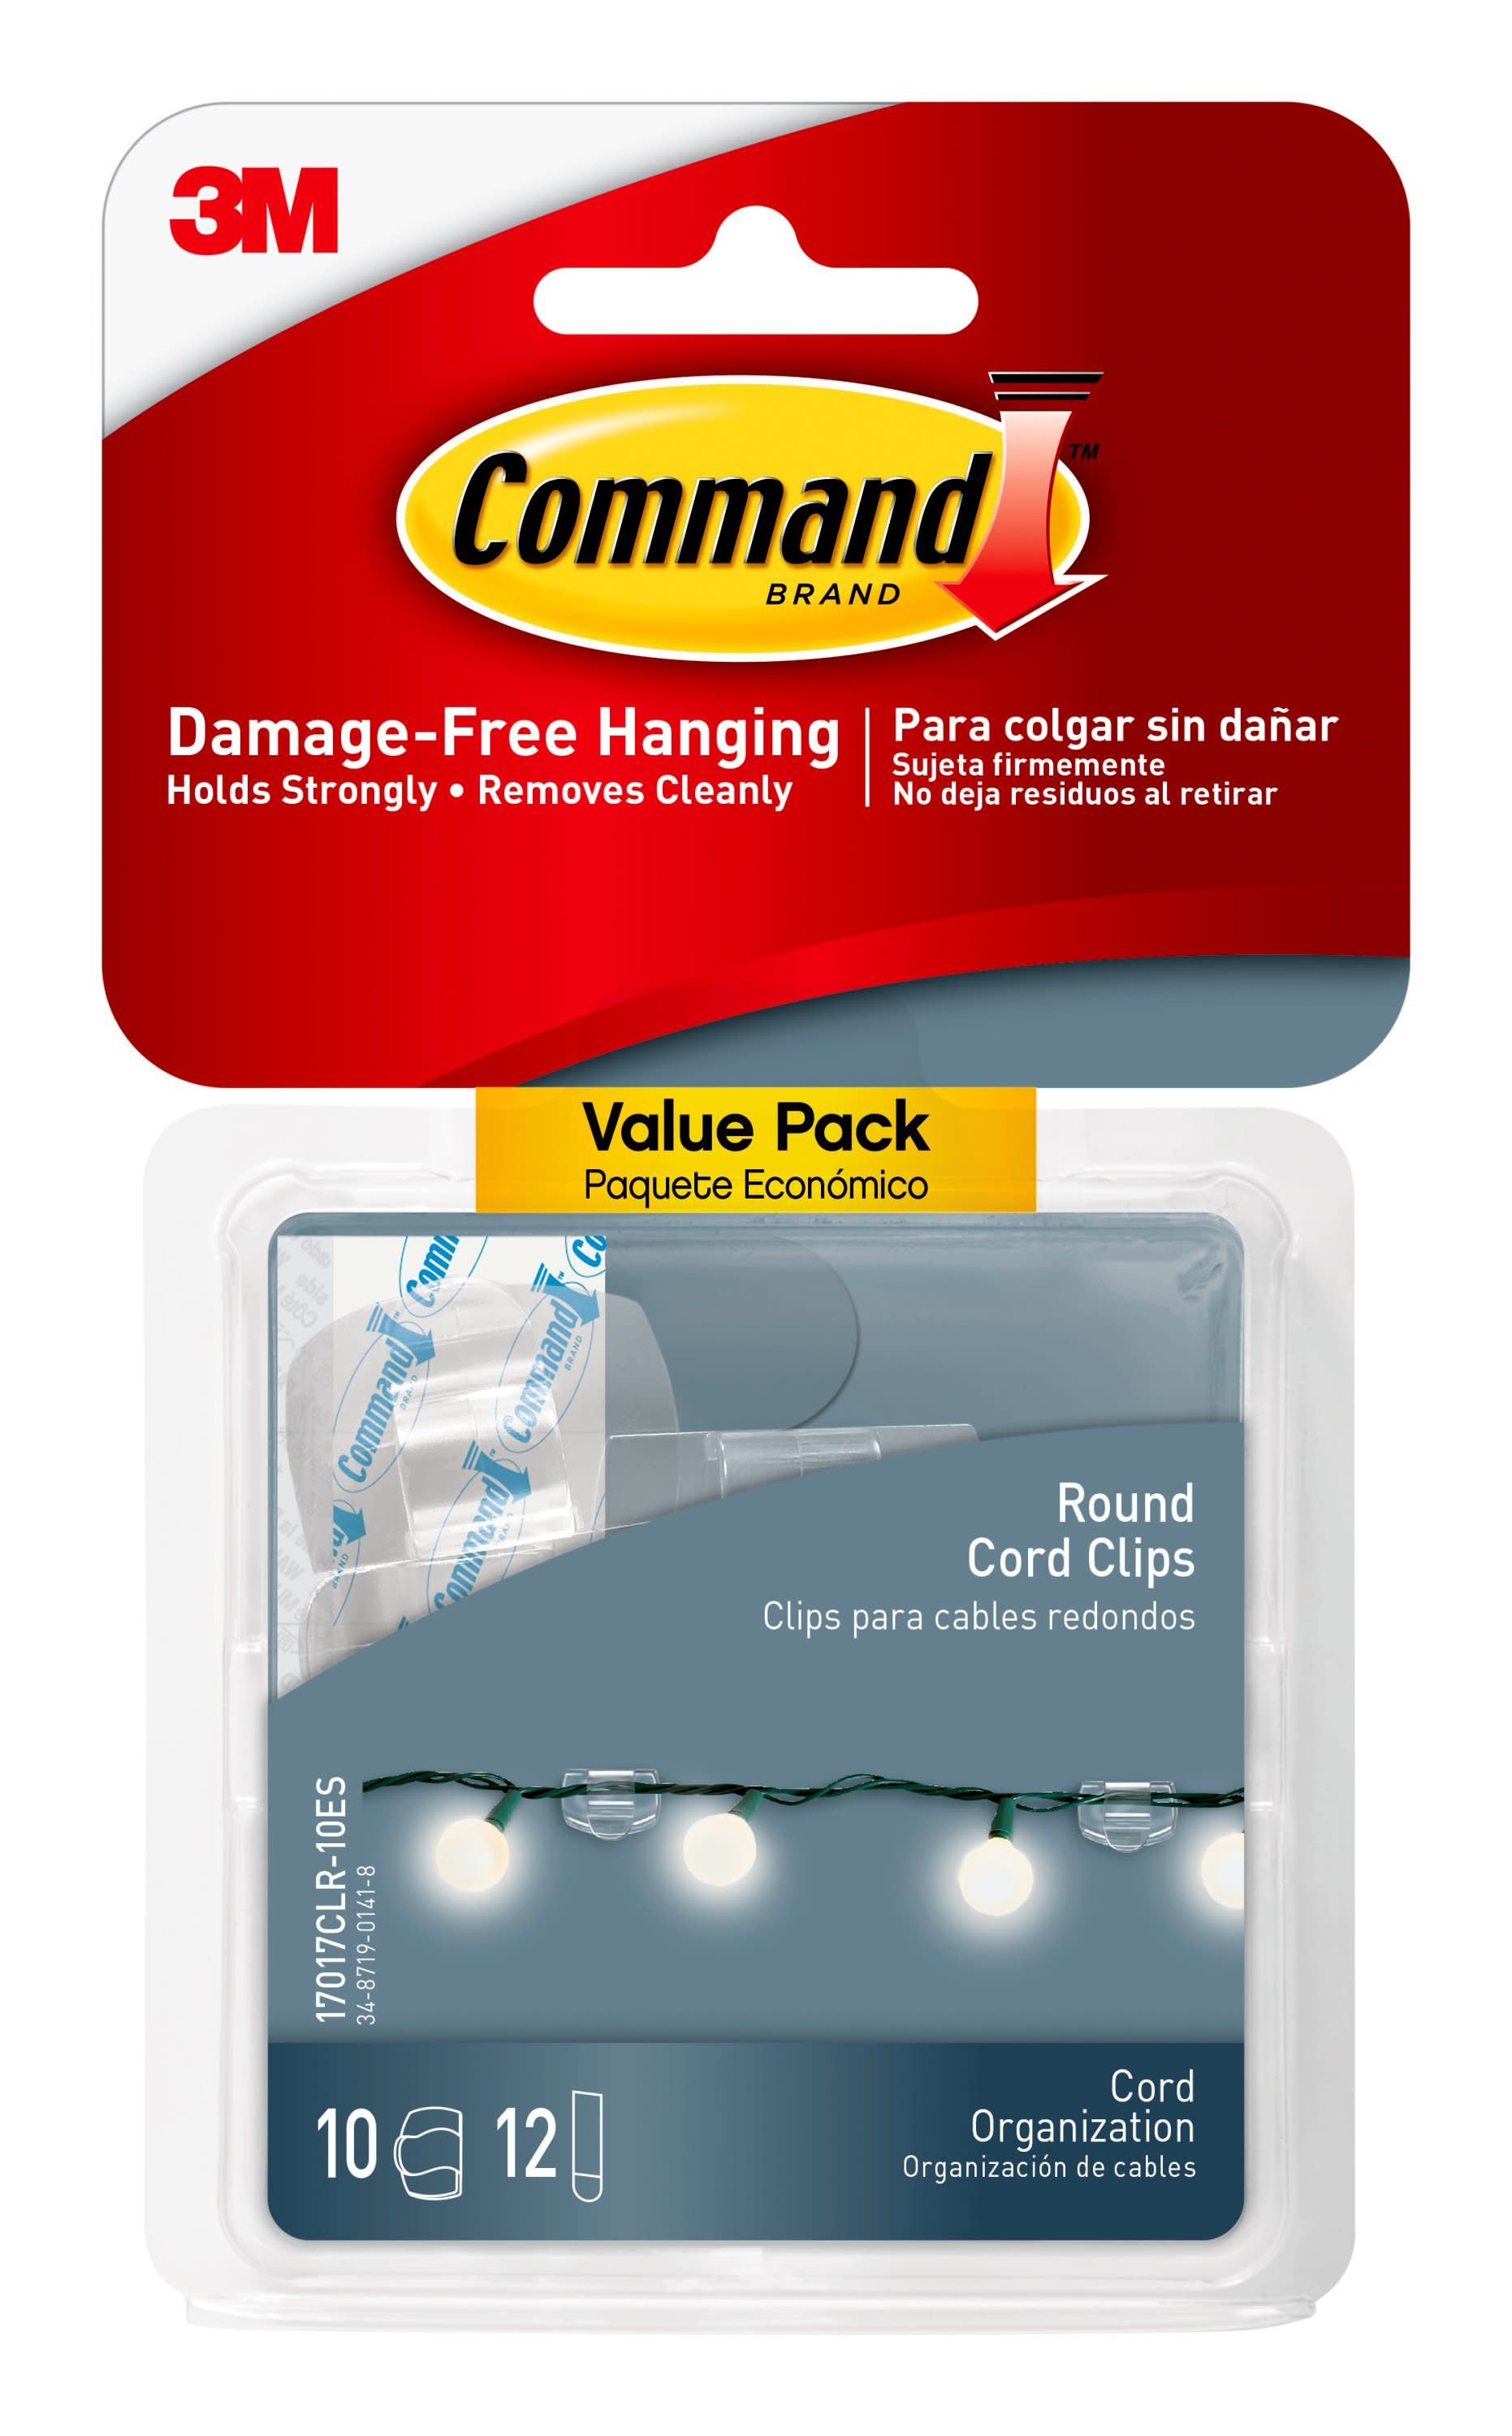 Command Round Cord Clips, Clear, Damage Free Organizing, 10 Cord Clips and 12 Strips - image 1 of 9